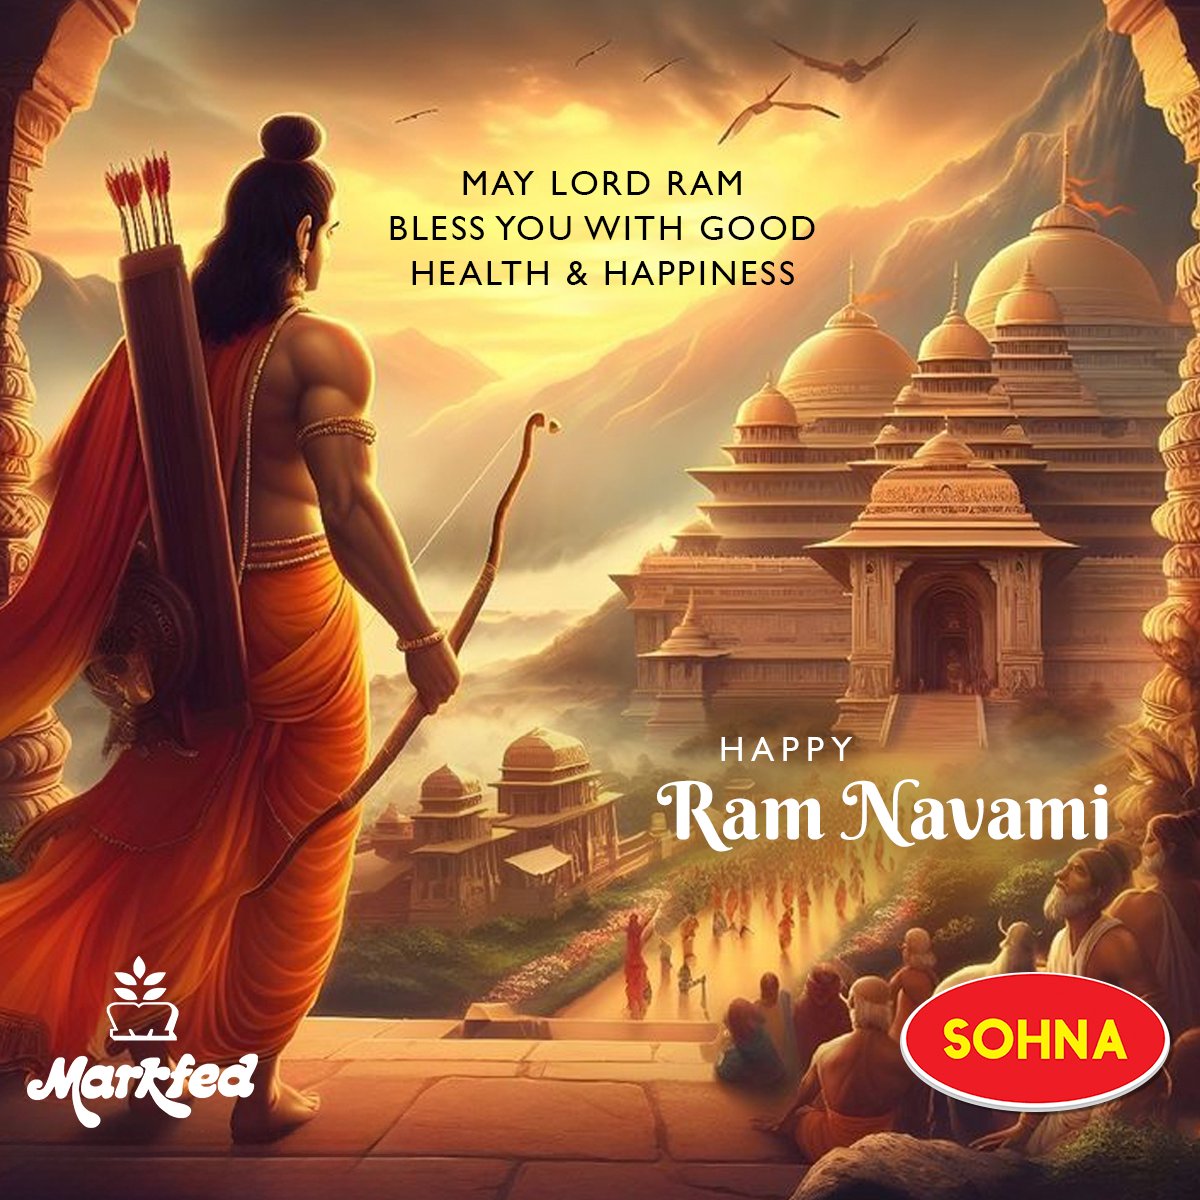 Embrace the divine radiance of Lord Ram on this Ram Navami and experience a life filled with health, happiness, and prosperity. 🙏✨ #SOHNA #SOHNAMarkfed #Punjab #lordram #ramnavami #Blessings #navratri2024